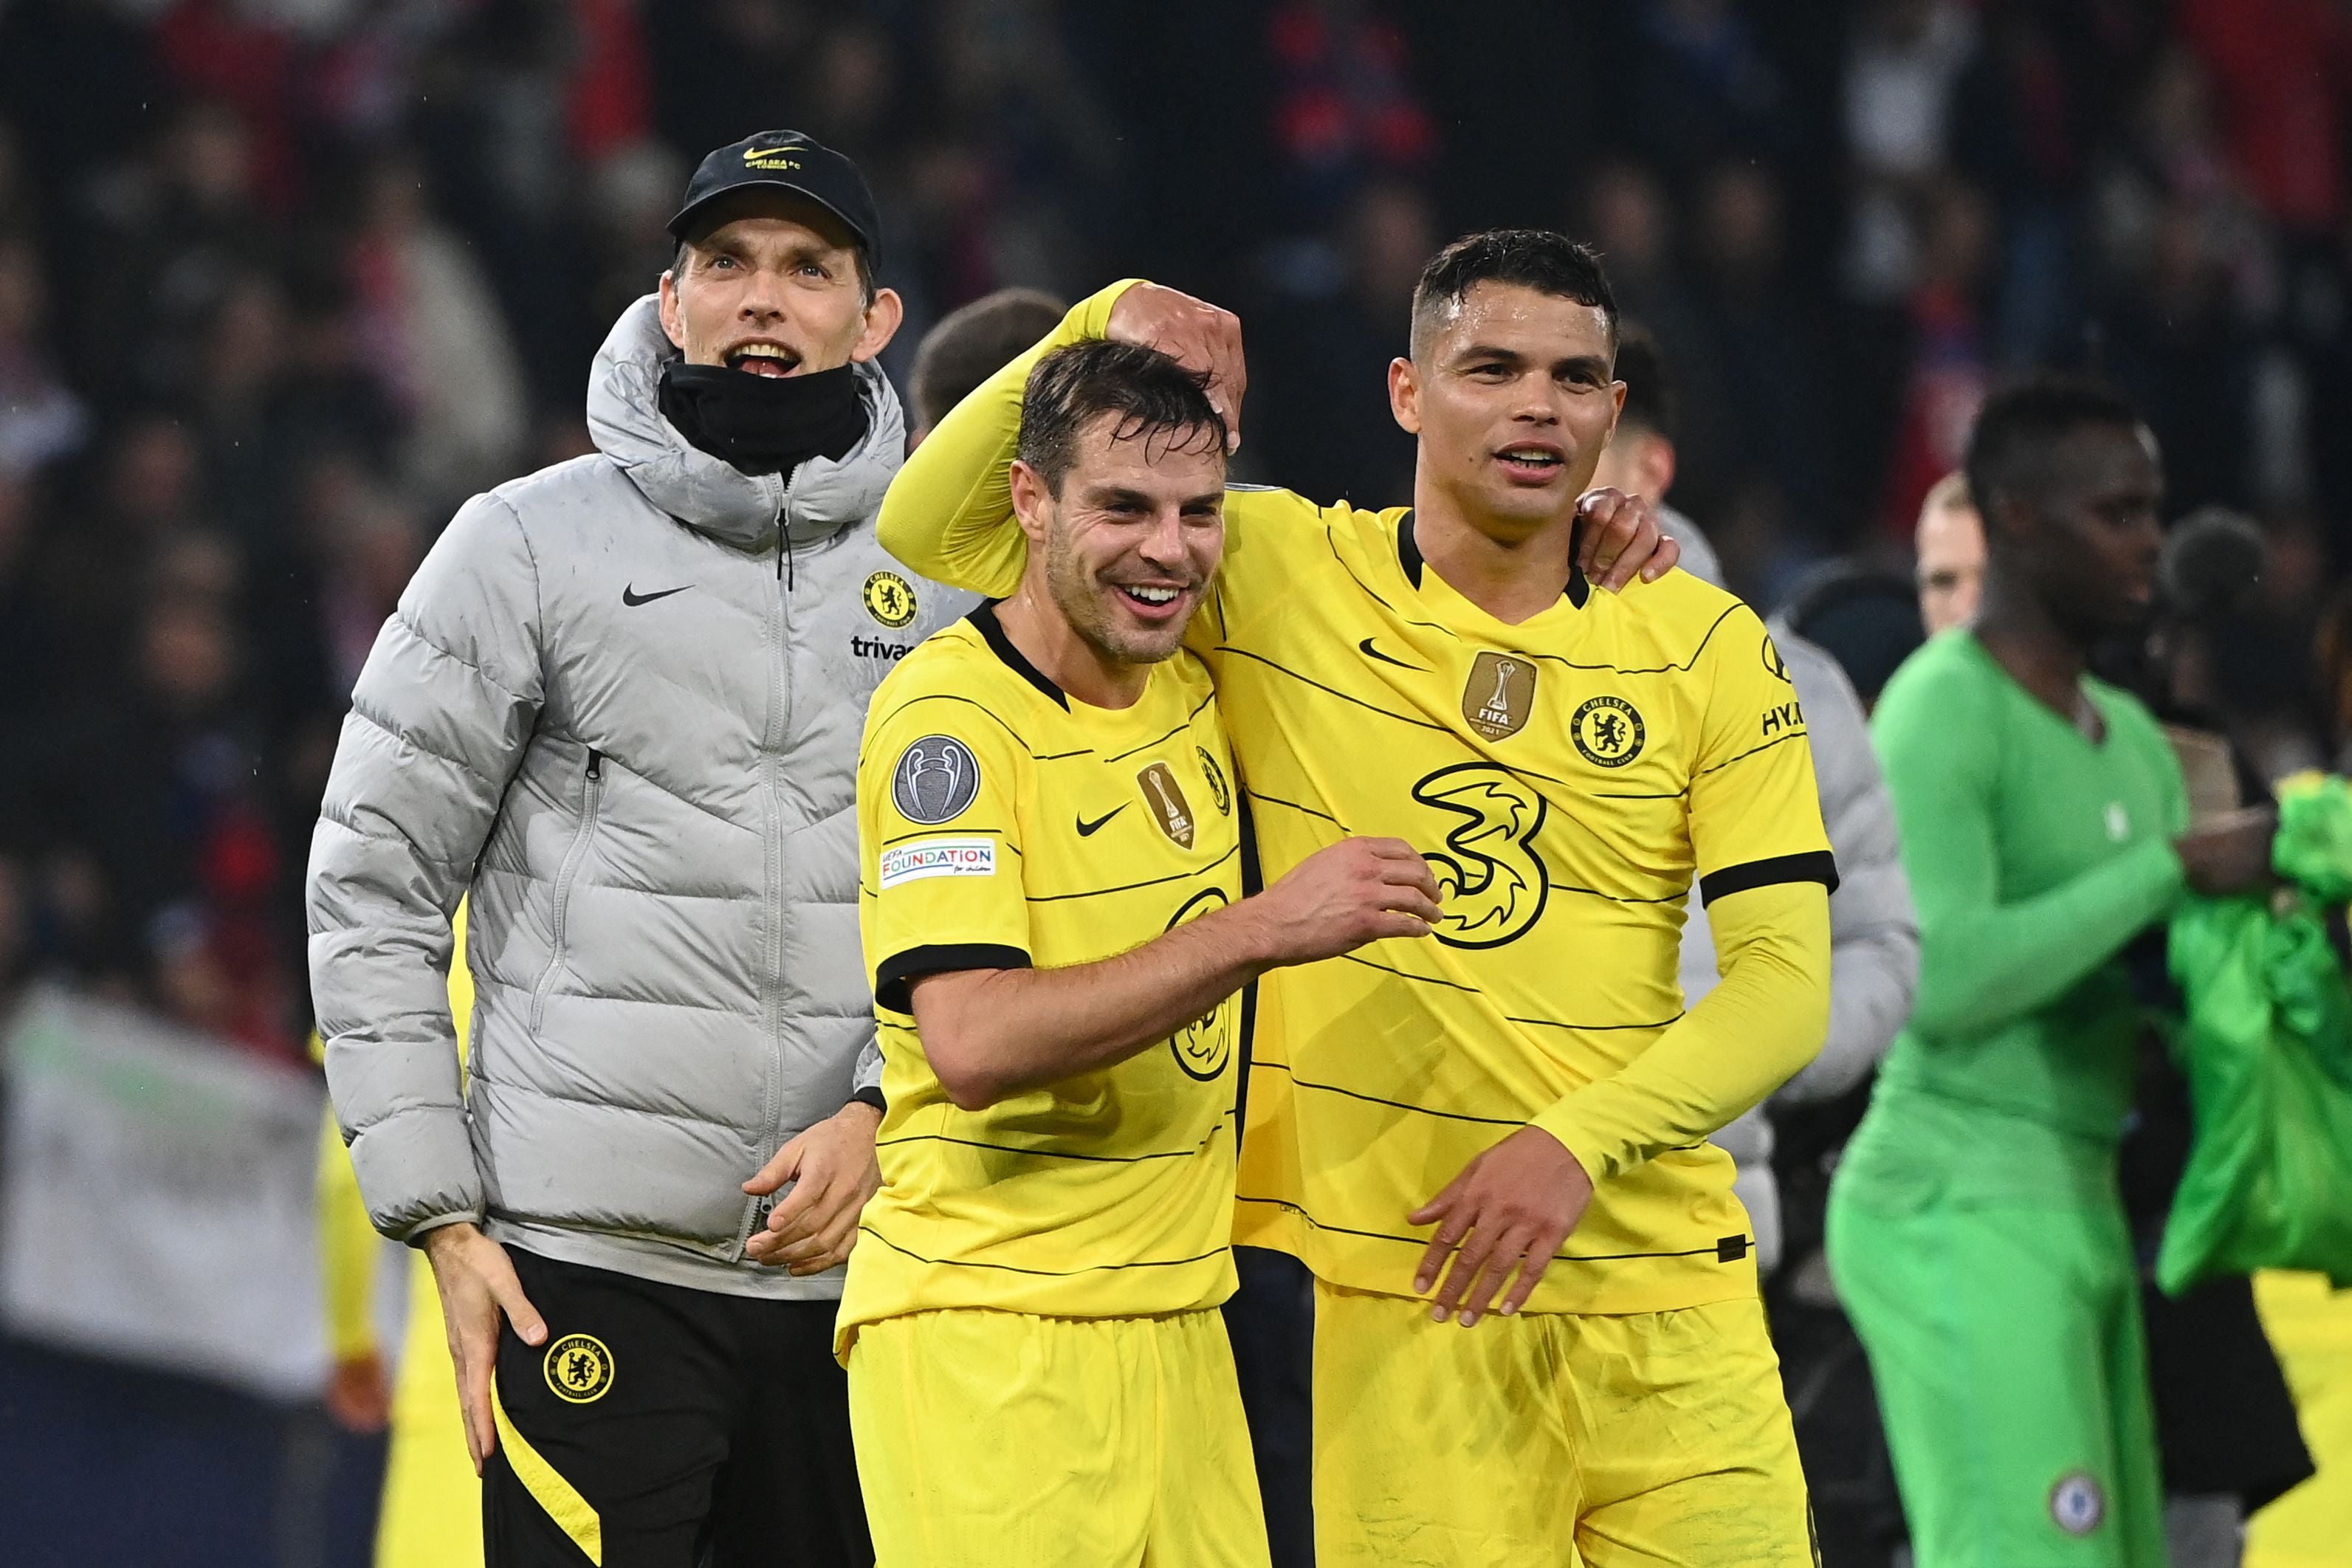 Chelsea beat Lille over two legs to reach the Champions League quarter-finals